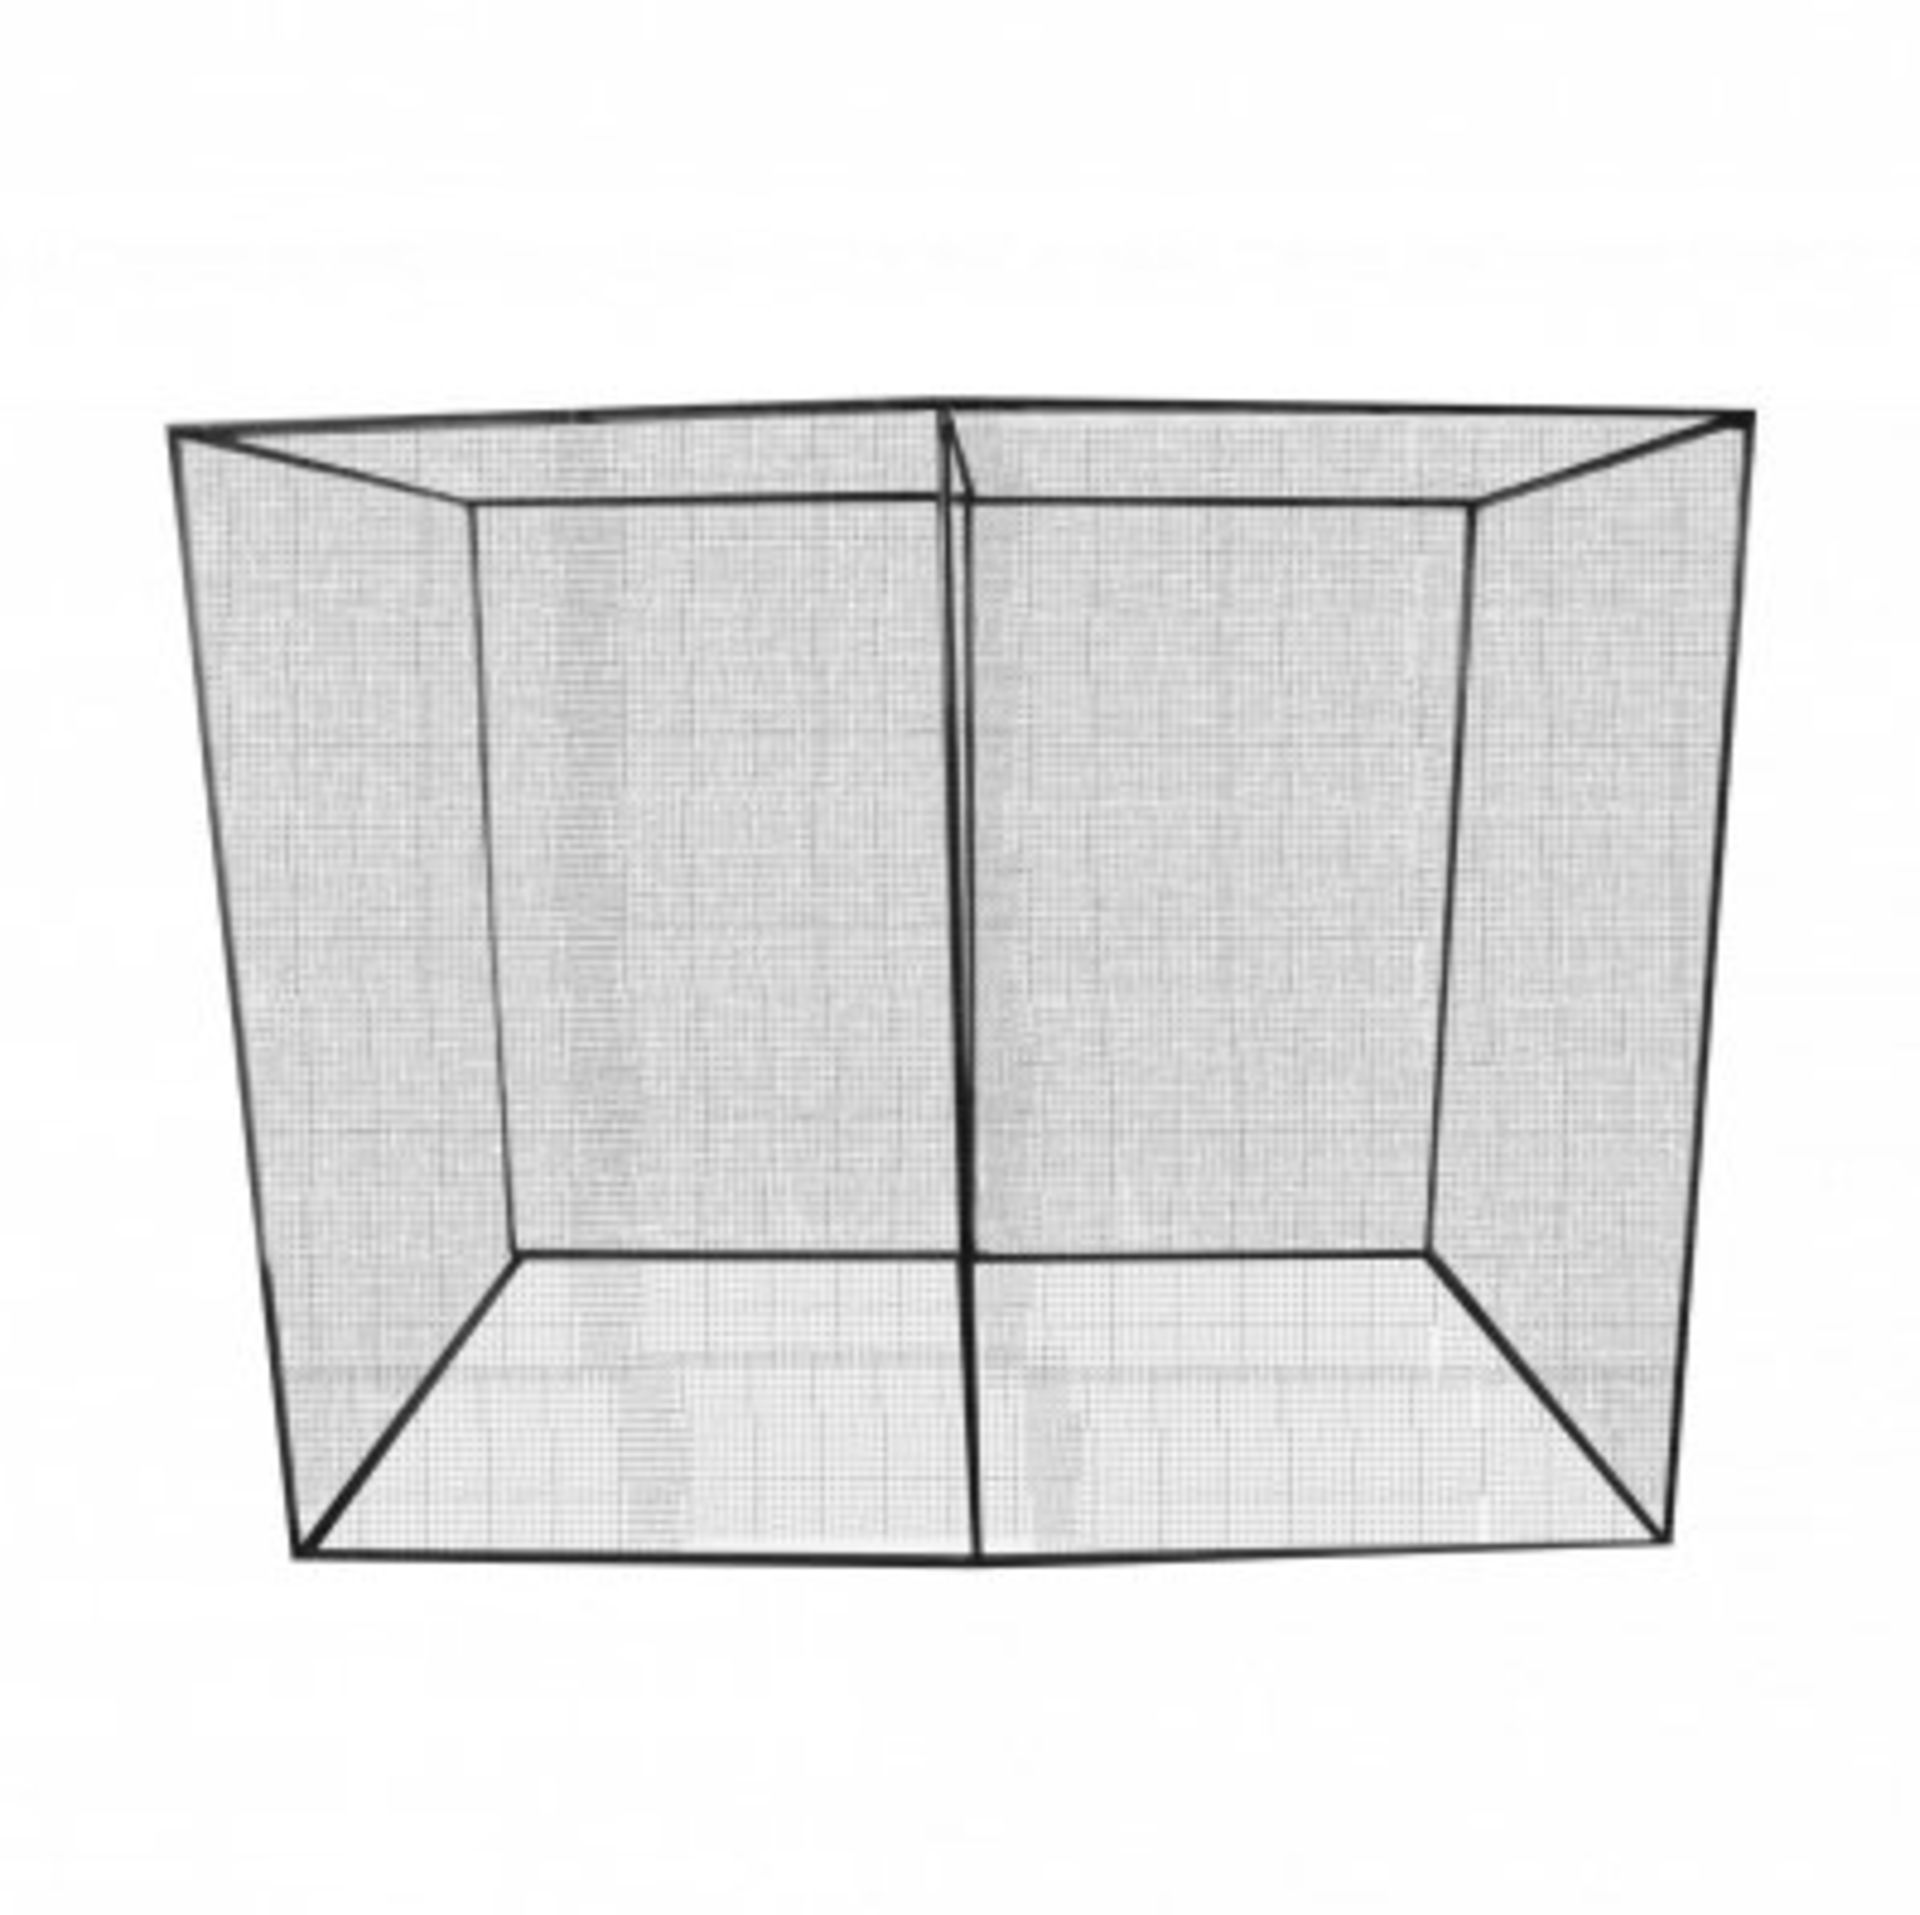 (RL69) 2m Garden Fruit Vegetable Protective Cage Netting Keep your home-grown fruit and ve...